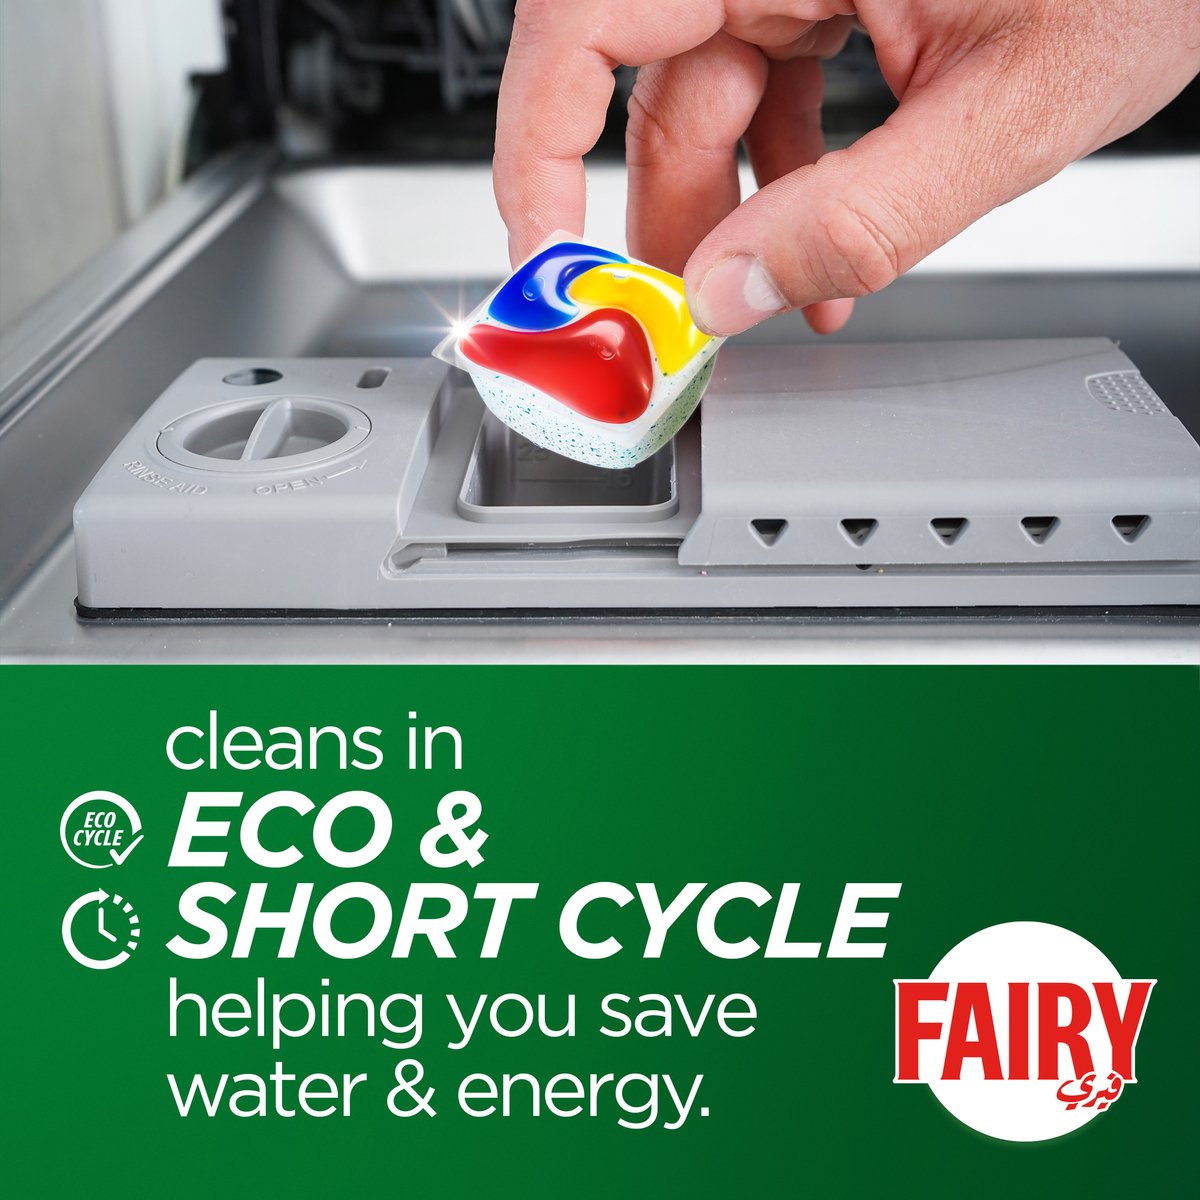 Fairy Platinum Plus 40 Washing Dishwasher Detergent Capsule/Tablet: Buy  Online at Best Price in Egypt - Souq is now